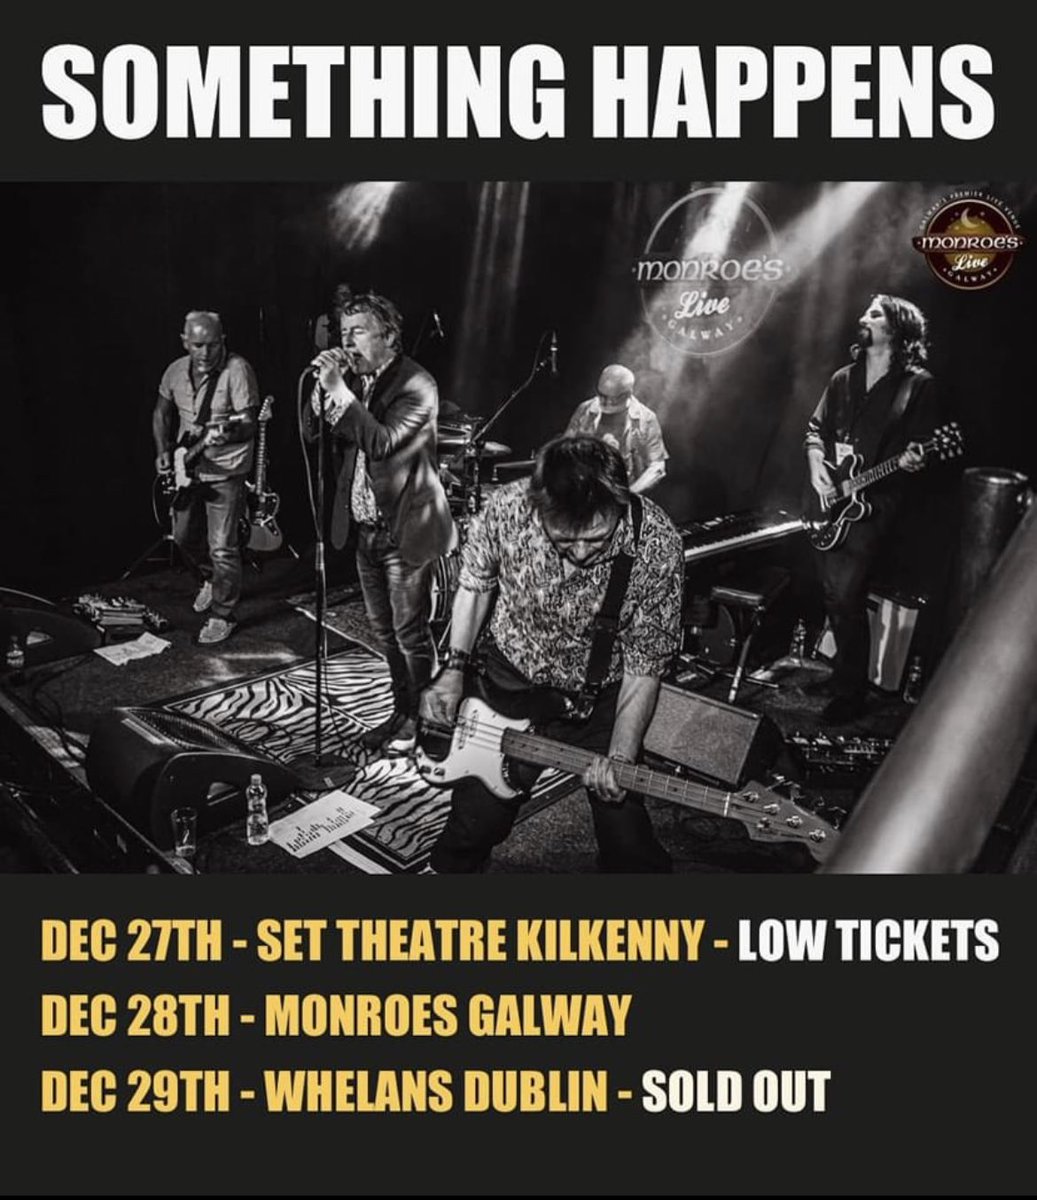 S.H.I.T. 23 - tickets going fast. Previous S.H.I.T’s always included a date in Gollierstown; a mythical place with rivers of beer & self tuning guitars … #somethinghappens #happens @marmosets